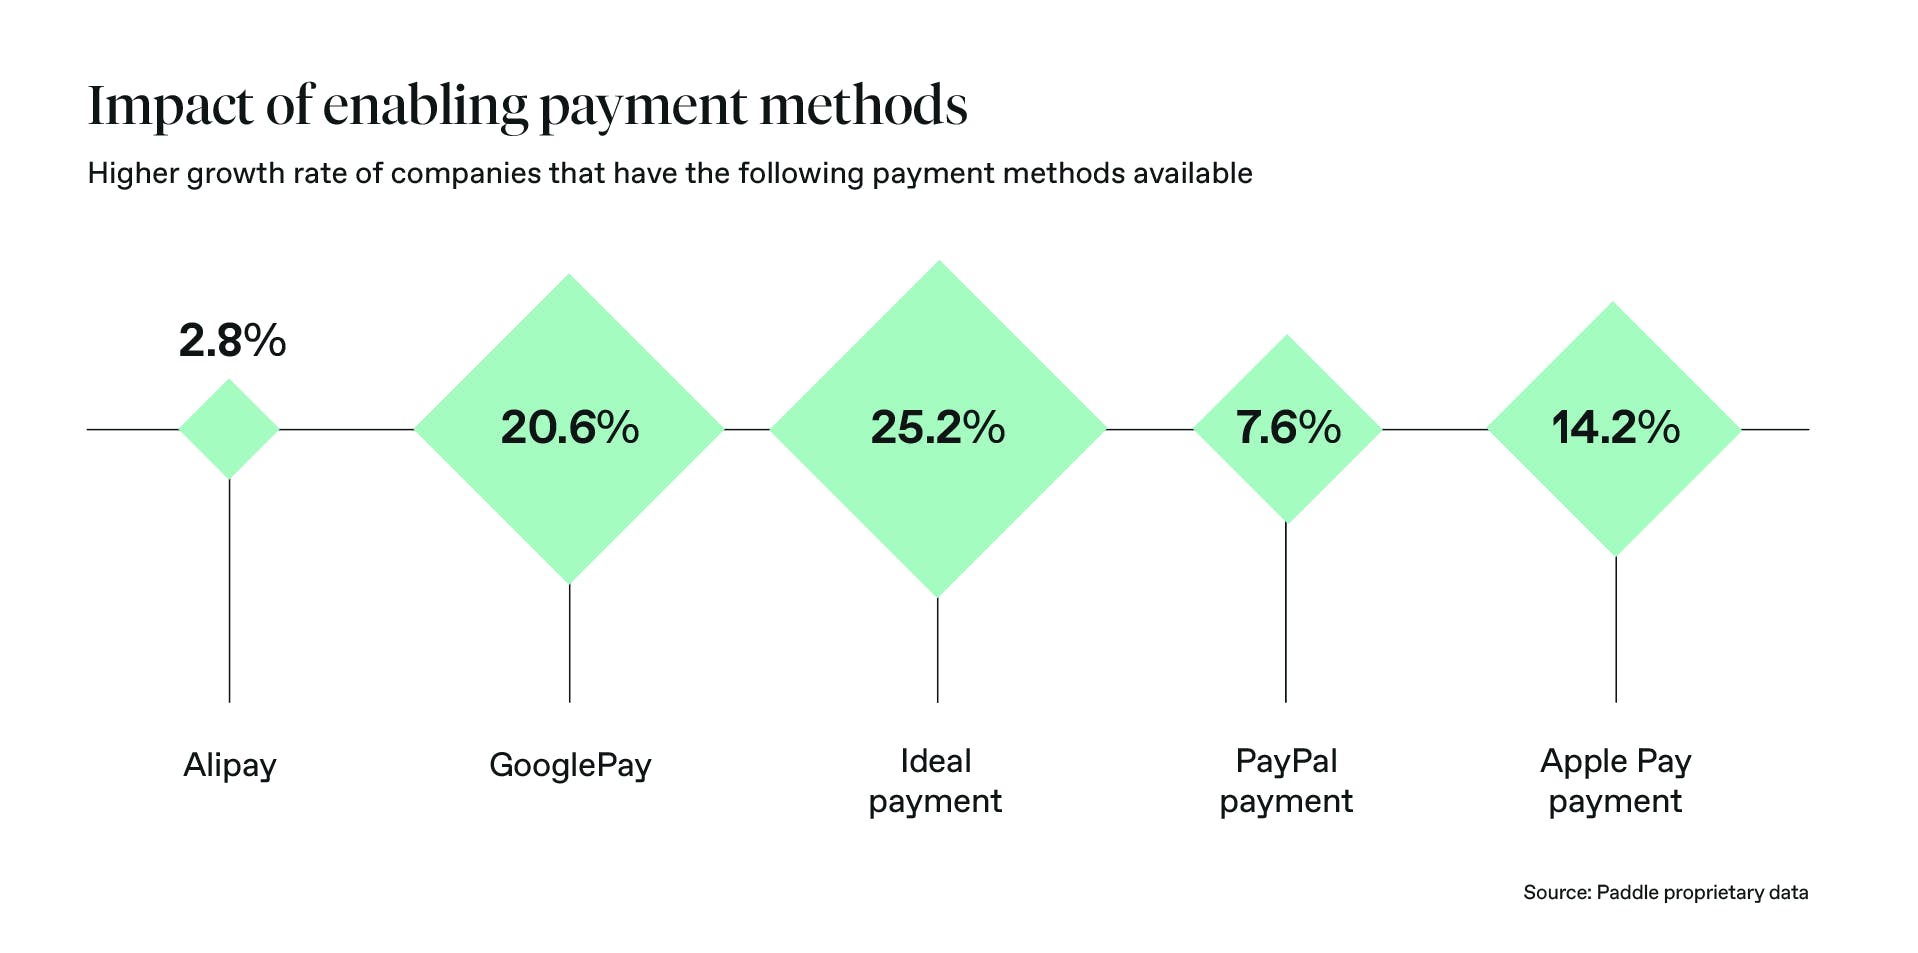 Data points on the growth rate impact of enabling alternative payment methods - Google pay - 20.6%, Ideal payment 25.2%, Apple Pay - 14.2%